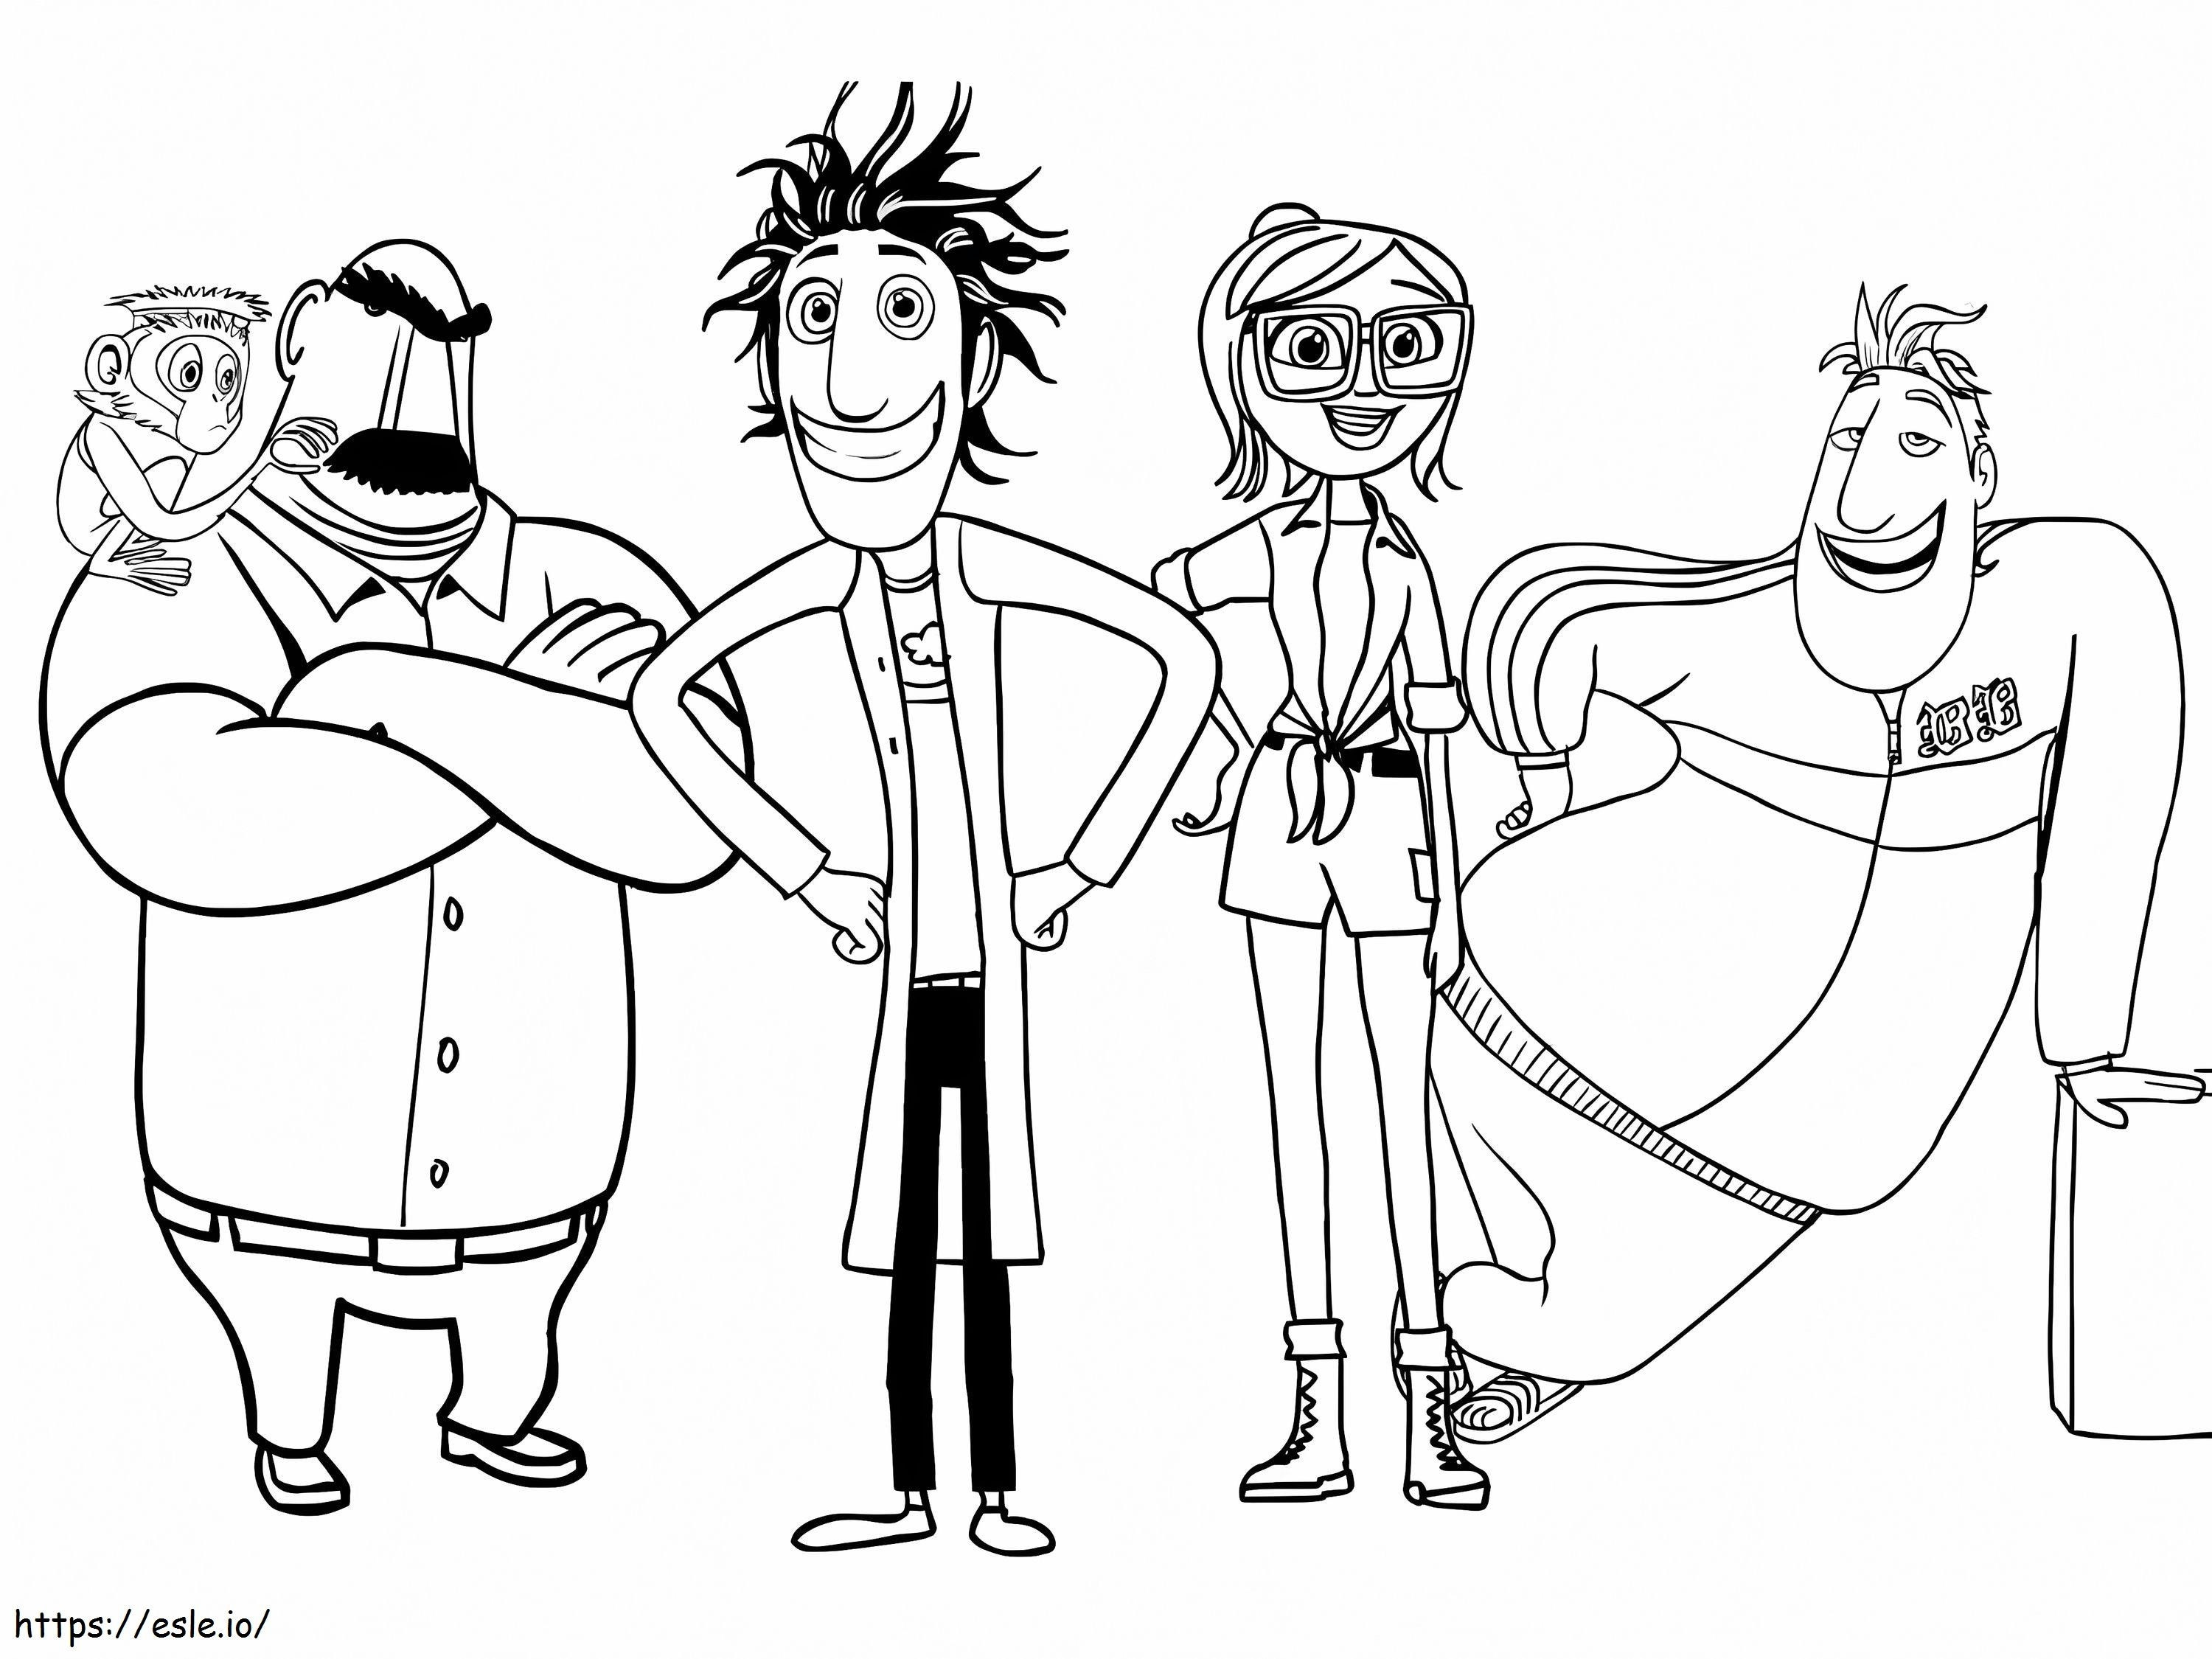 Cloudy With A Chance Of Meatballs 20 coloring page